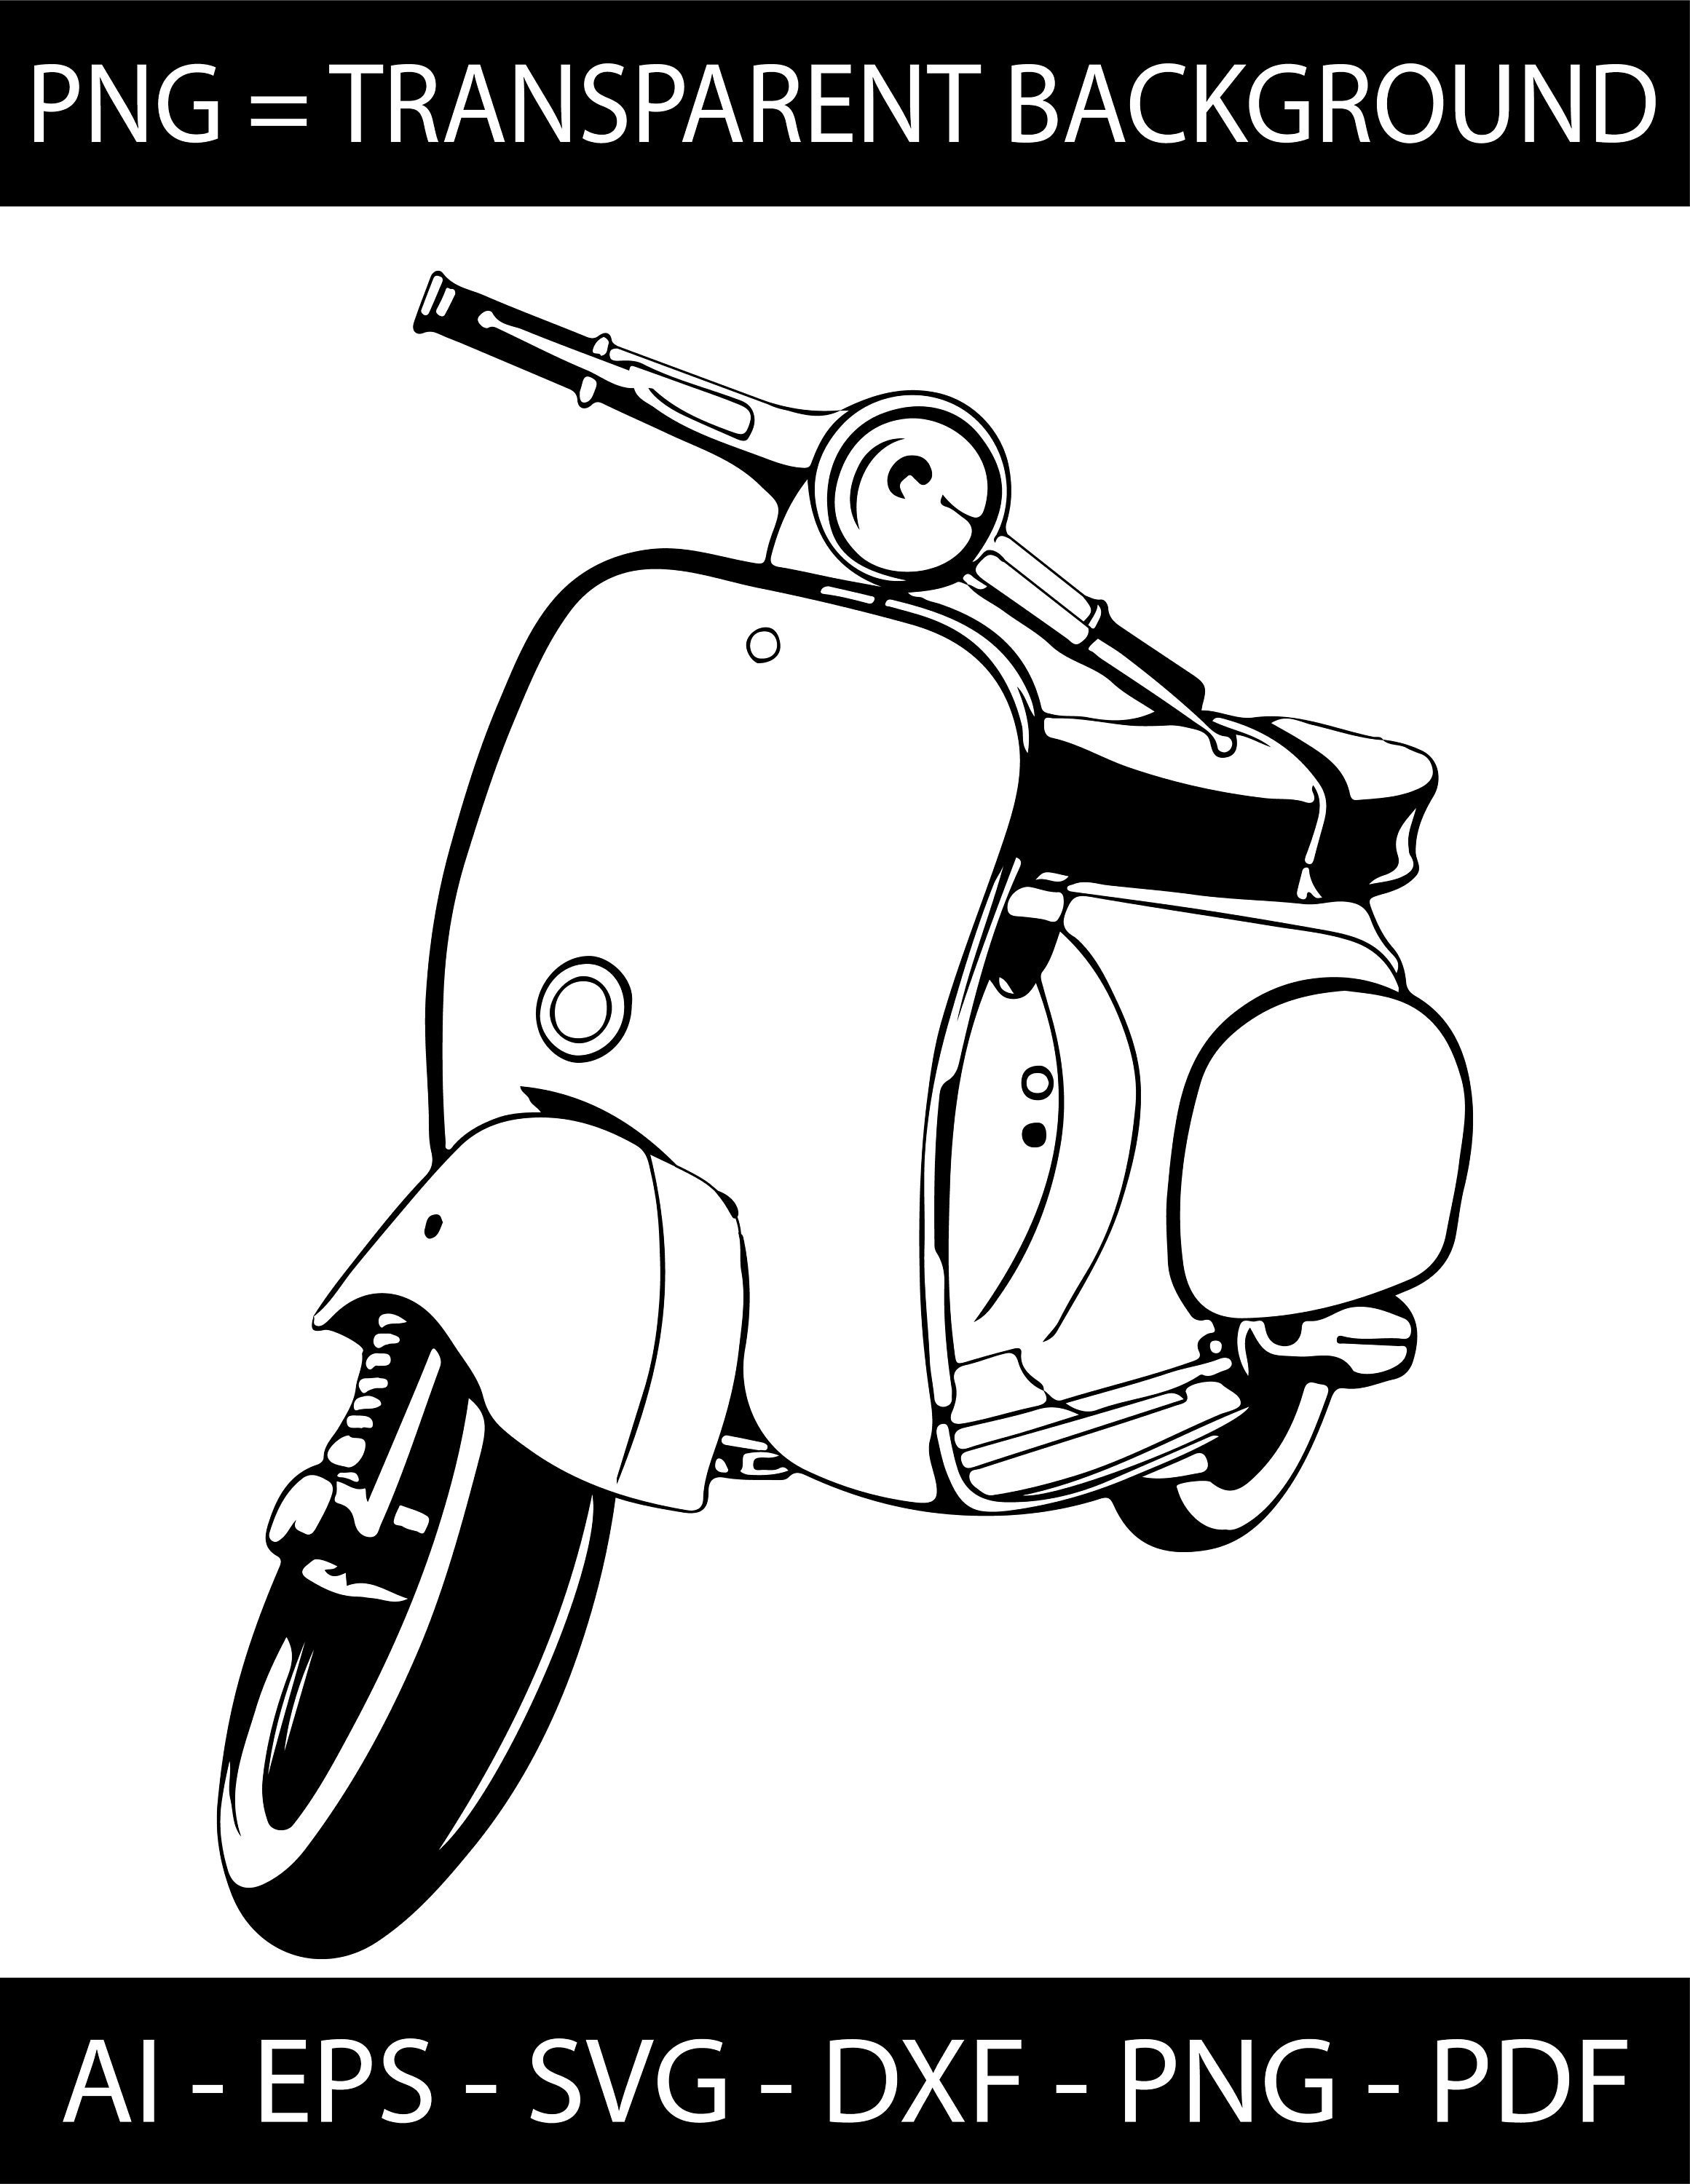 Buy Vespa Decal Online In India -  India